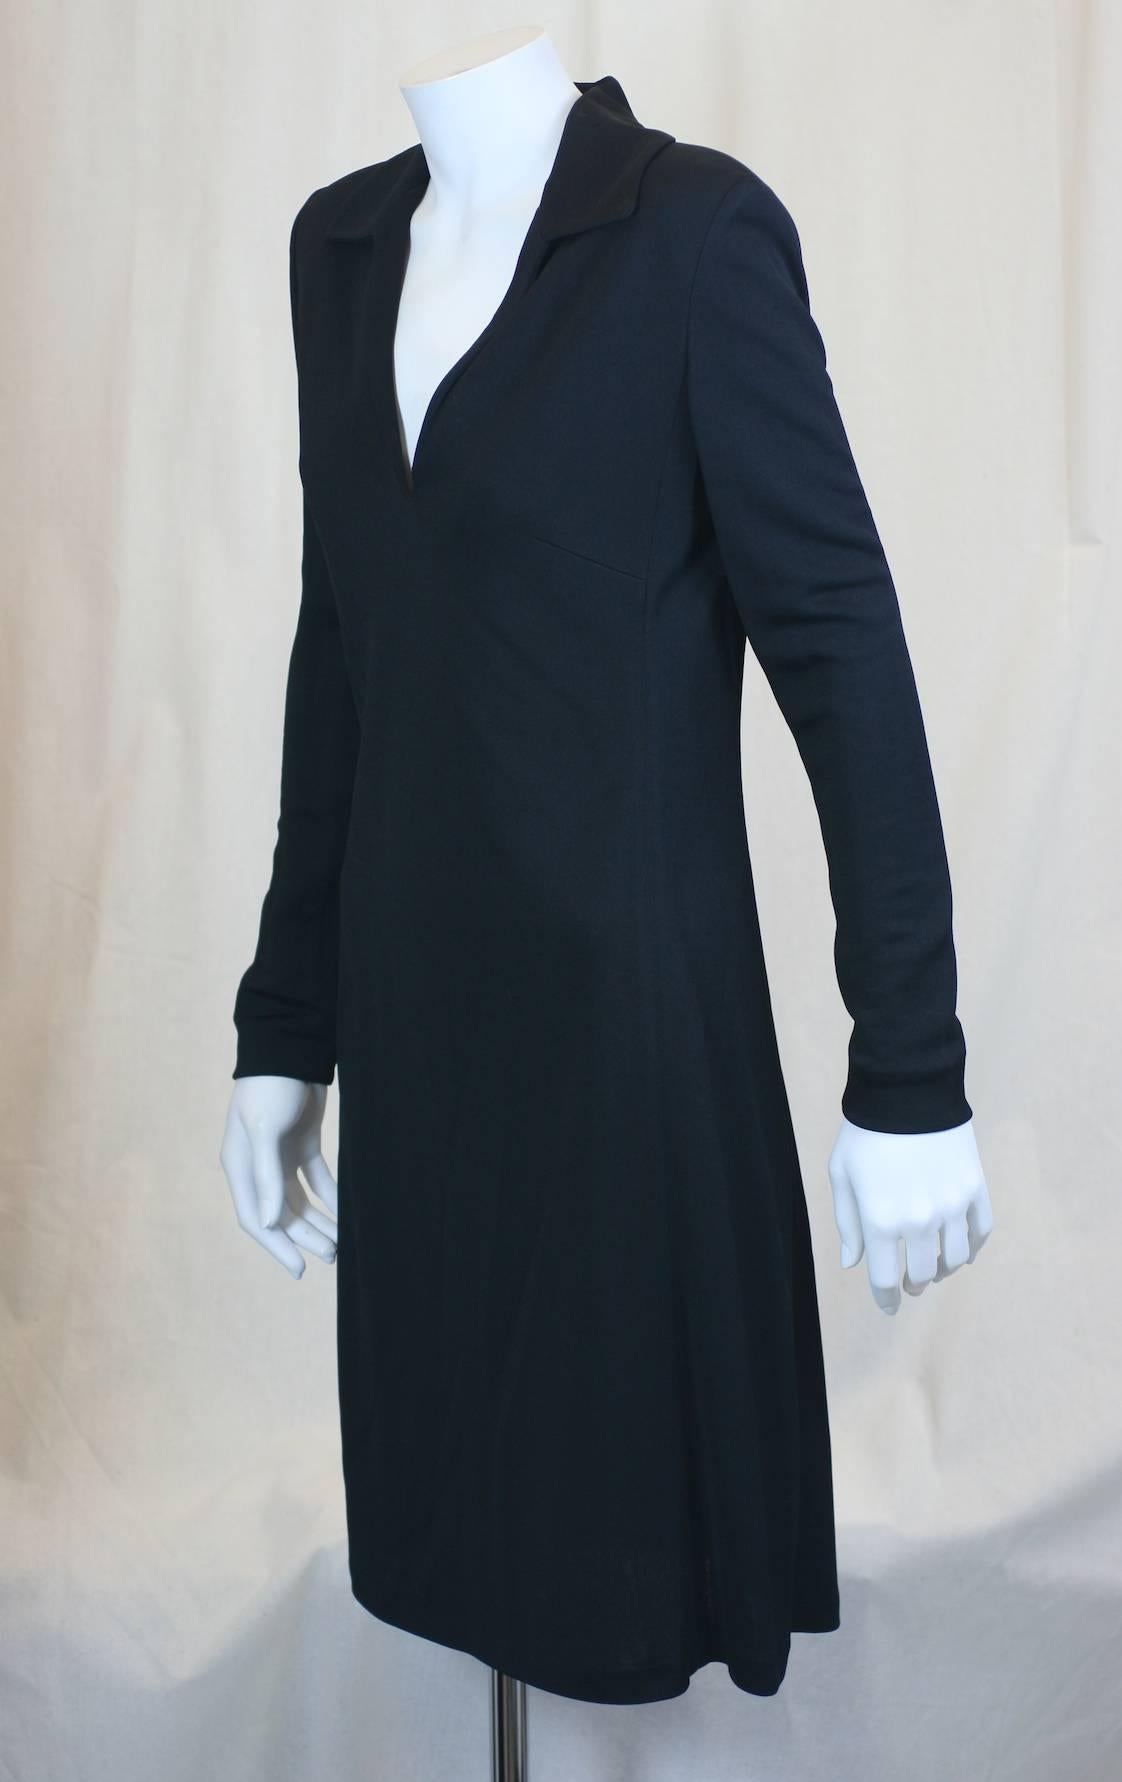 Tom Ford for Gucci black rayon jersey long sleeved V necked collared day dress with slightly flaring hem. Small size. 
Dress pulls over head. No zippers. 
Shoulders are slightly padded. Excellent Condition. 
Length 36